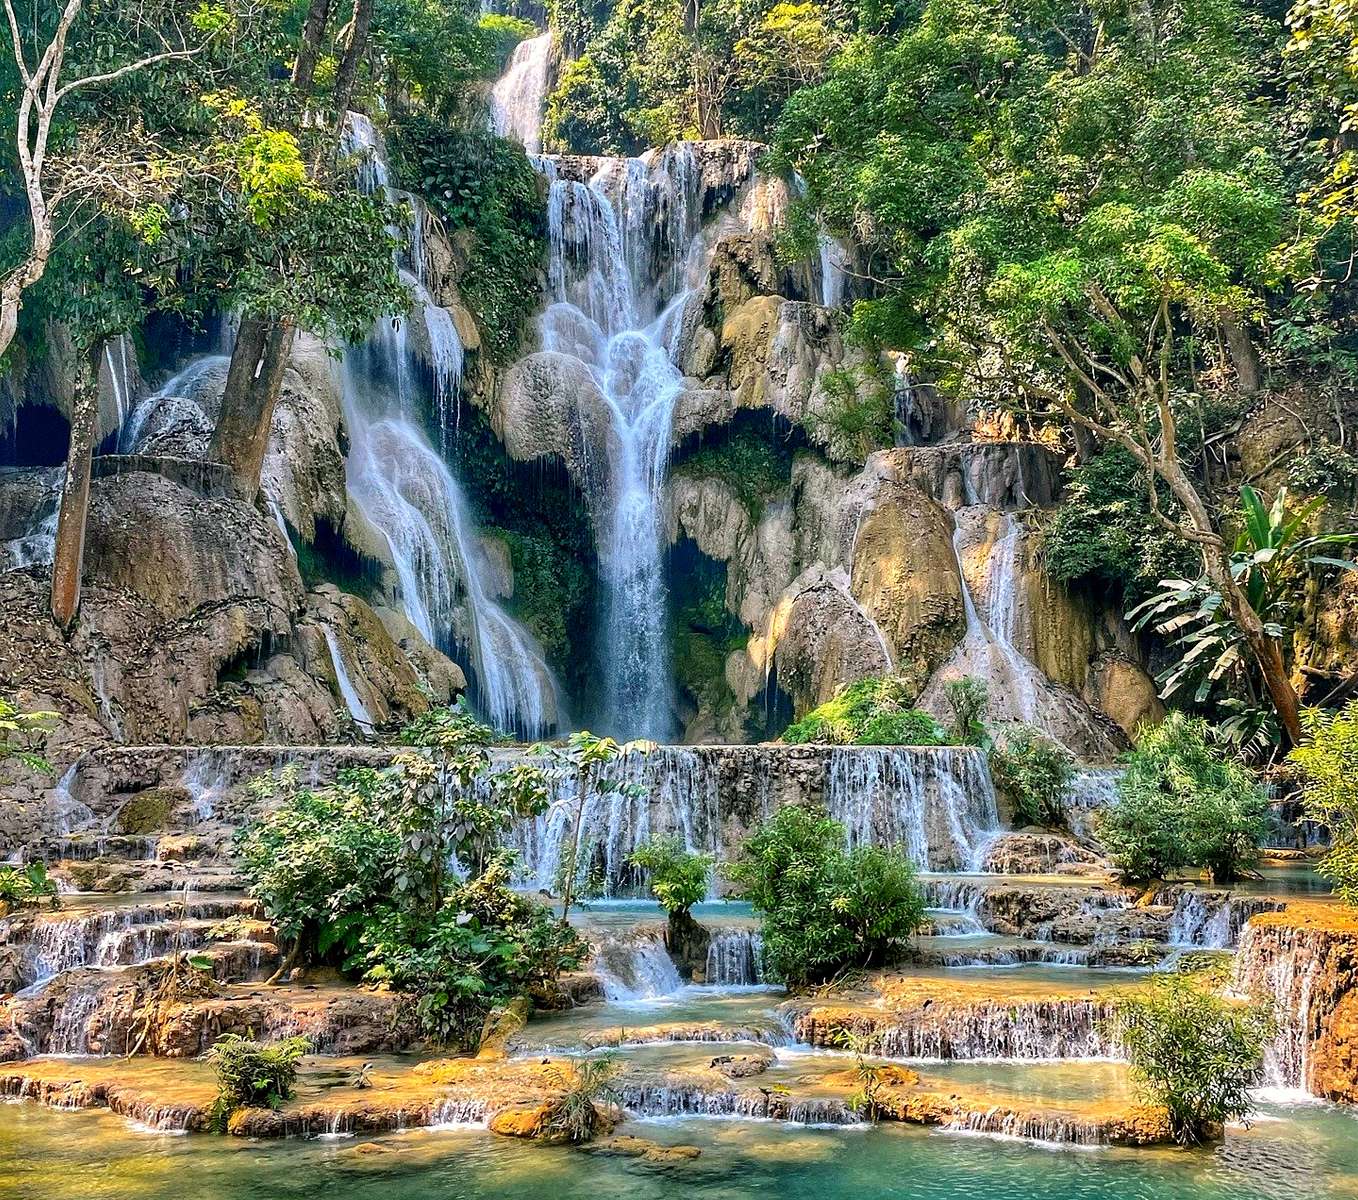 The turquoise waterfall of Kuang Si in Laos jigsaw puzzle online